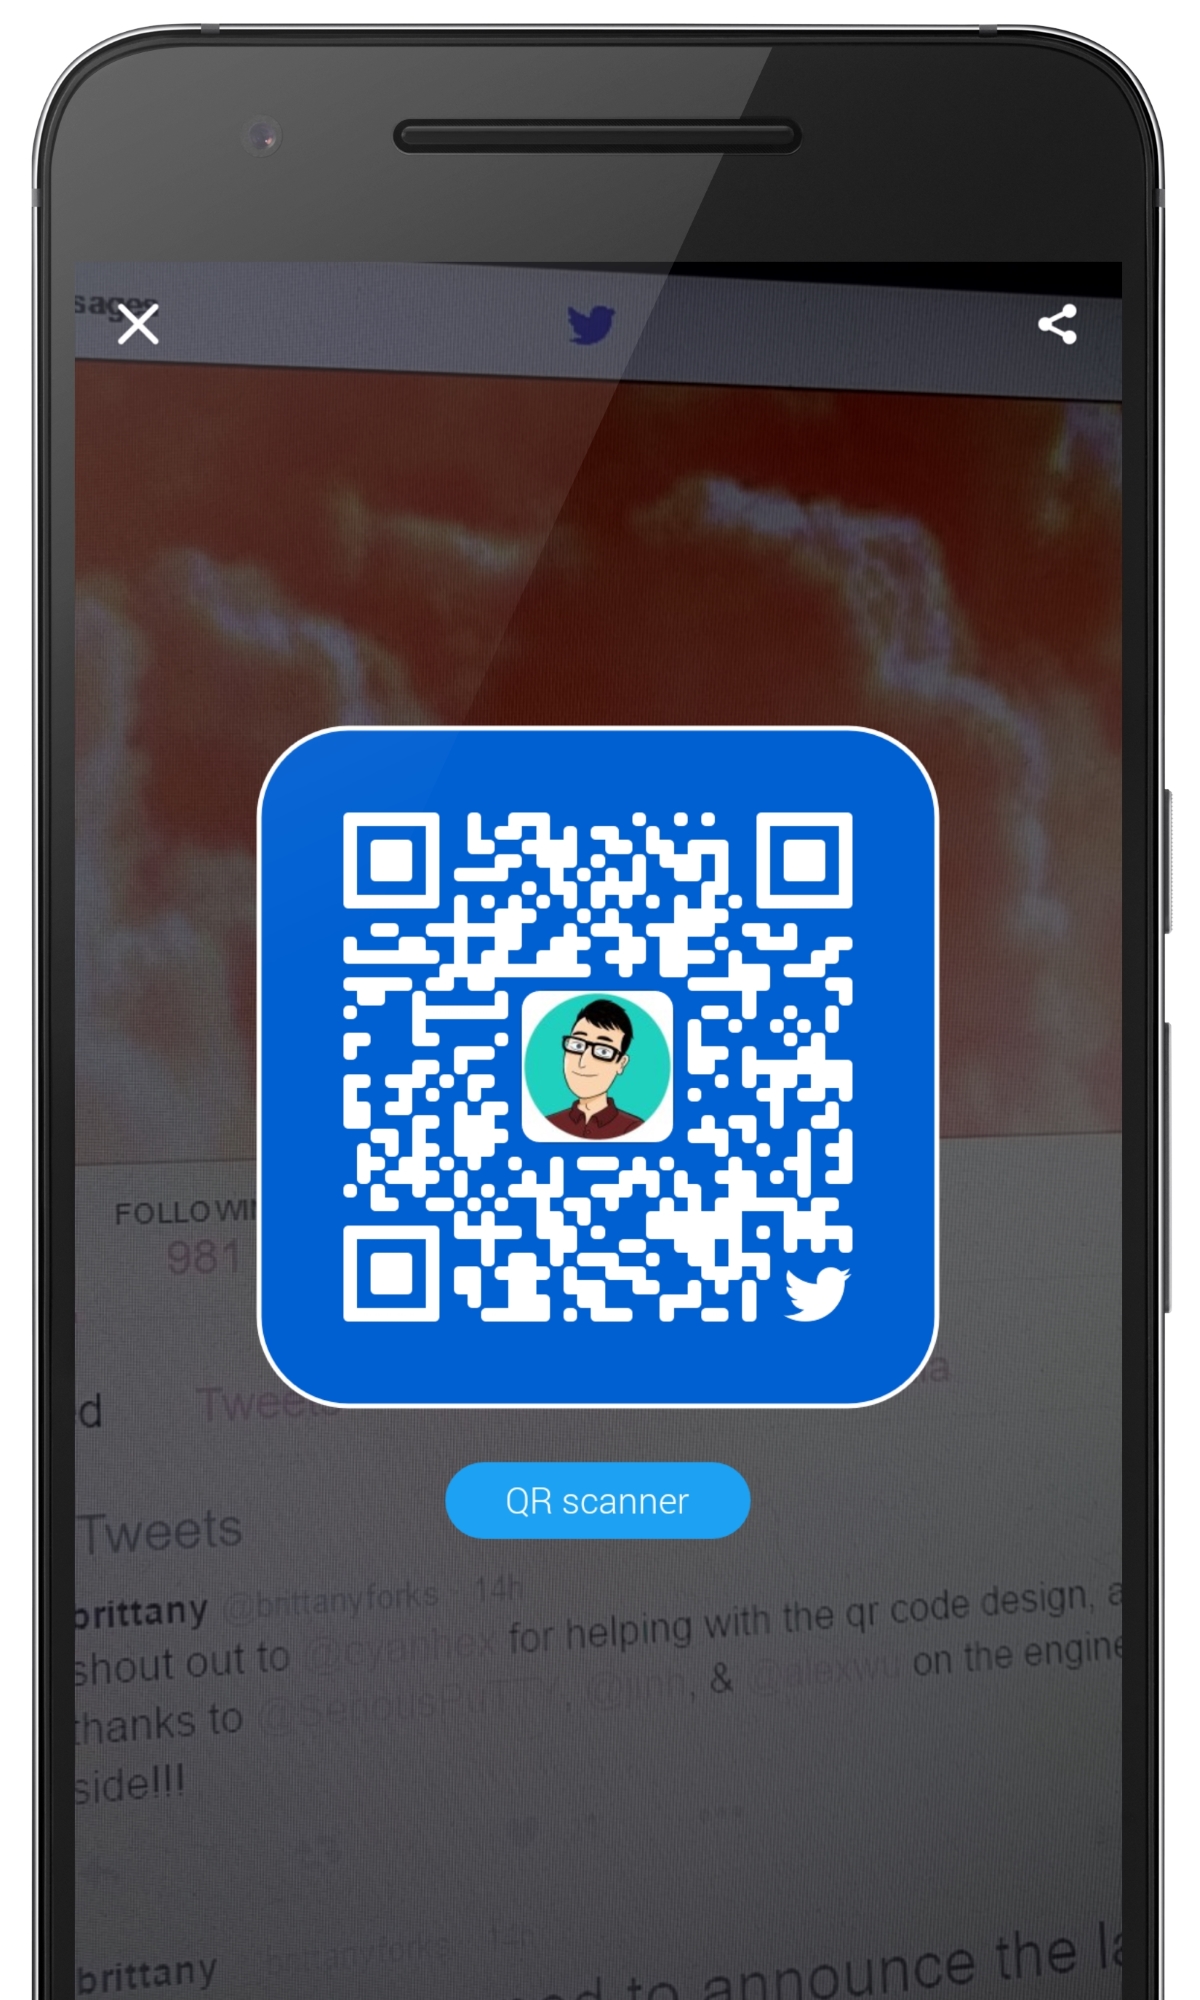 Twitter Introduces Snapchat-style QR Codes